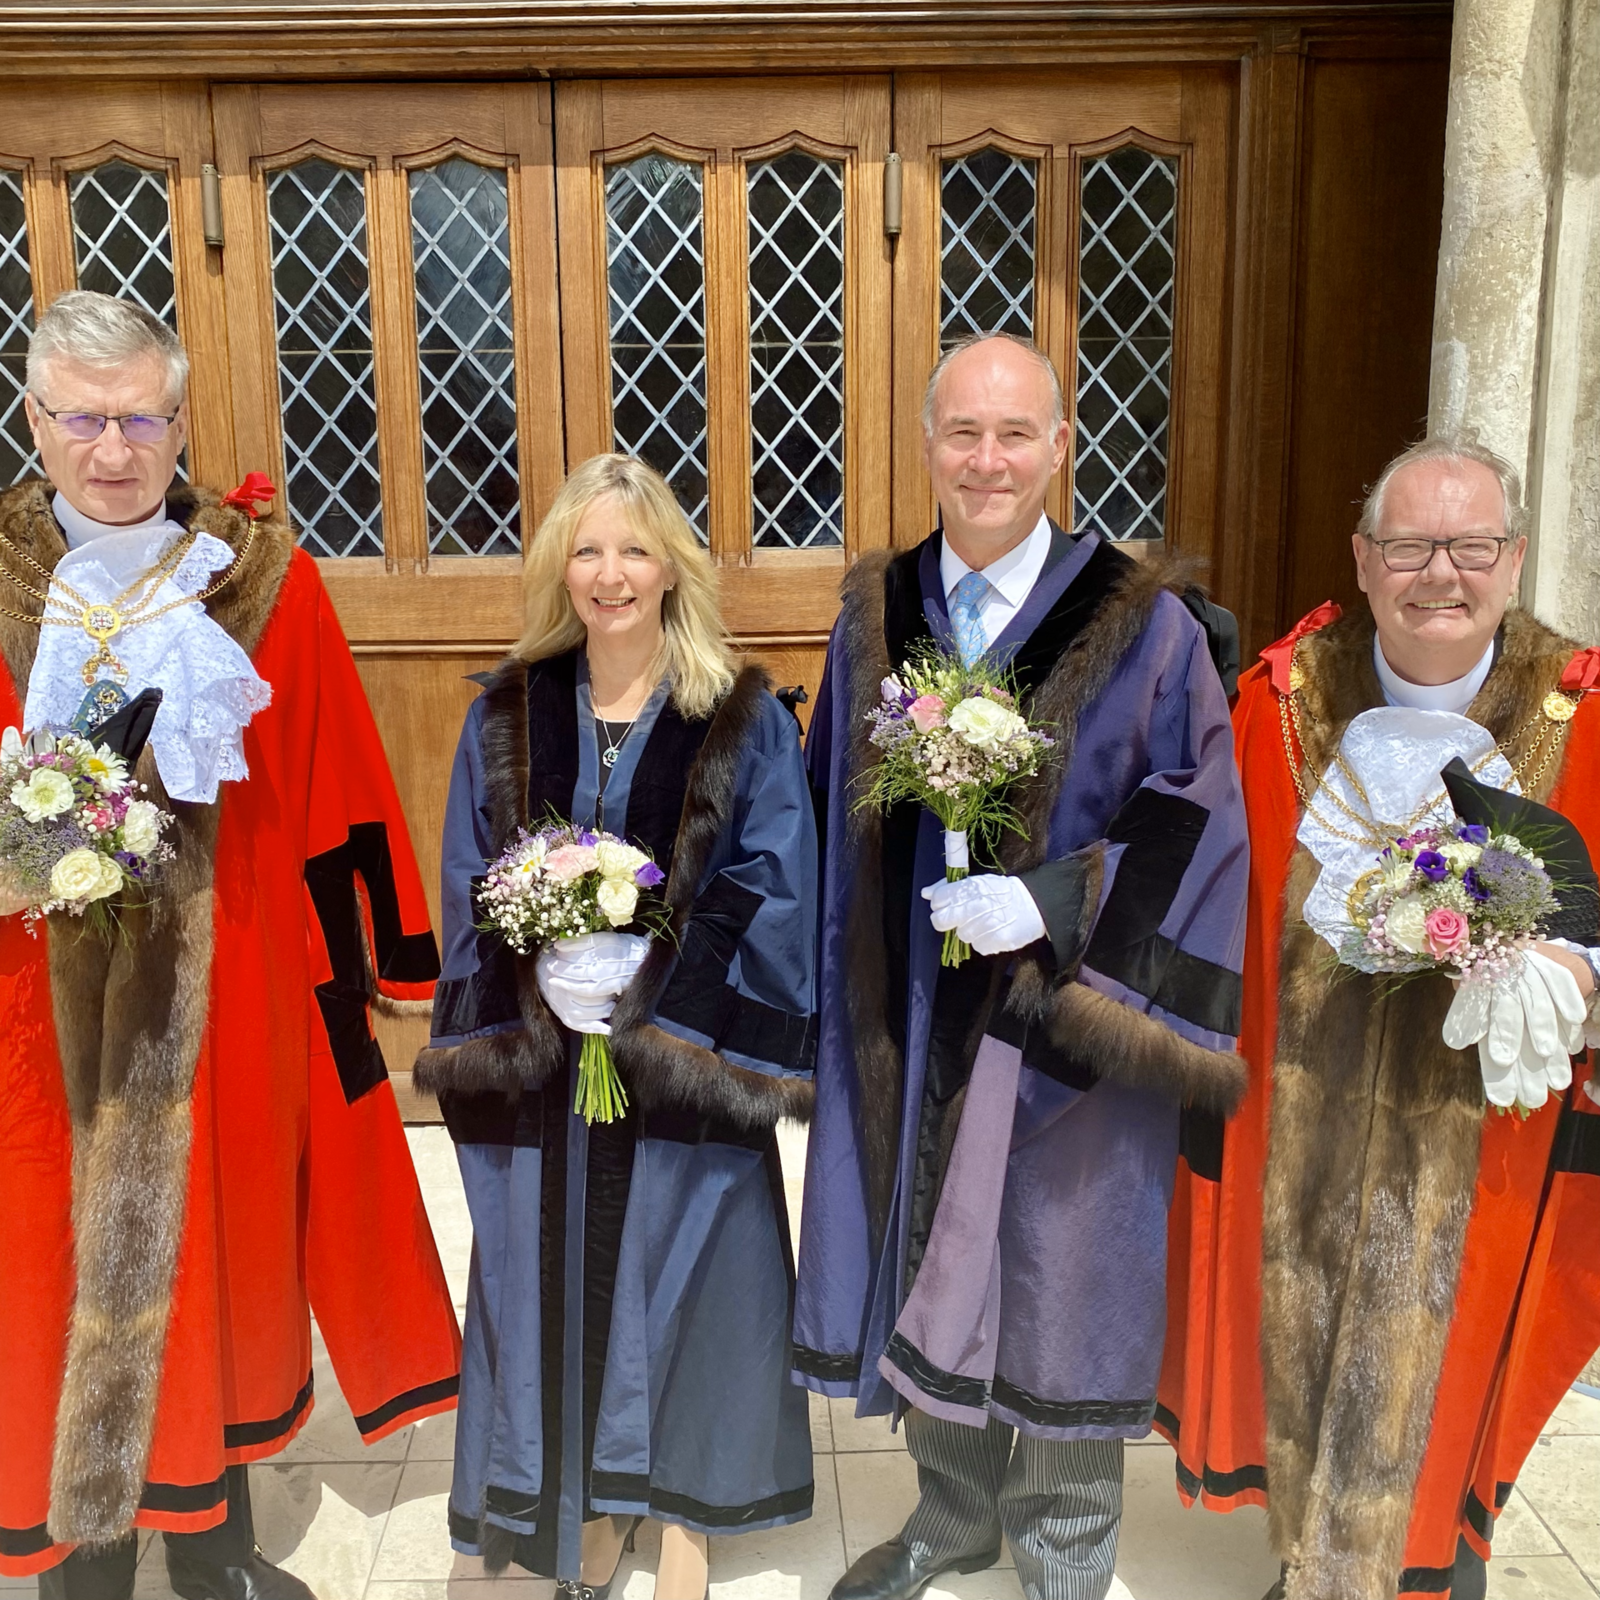 26 June 2023 - Successors Elected ...For only the 8th time in 80 years the Livery were asked to support the election of two members of the Court of Alderman as Sheriffs for the new shrieval year beginning in September.